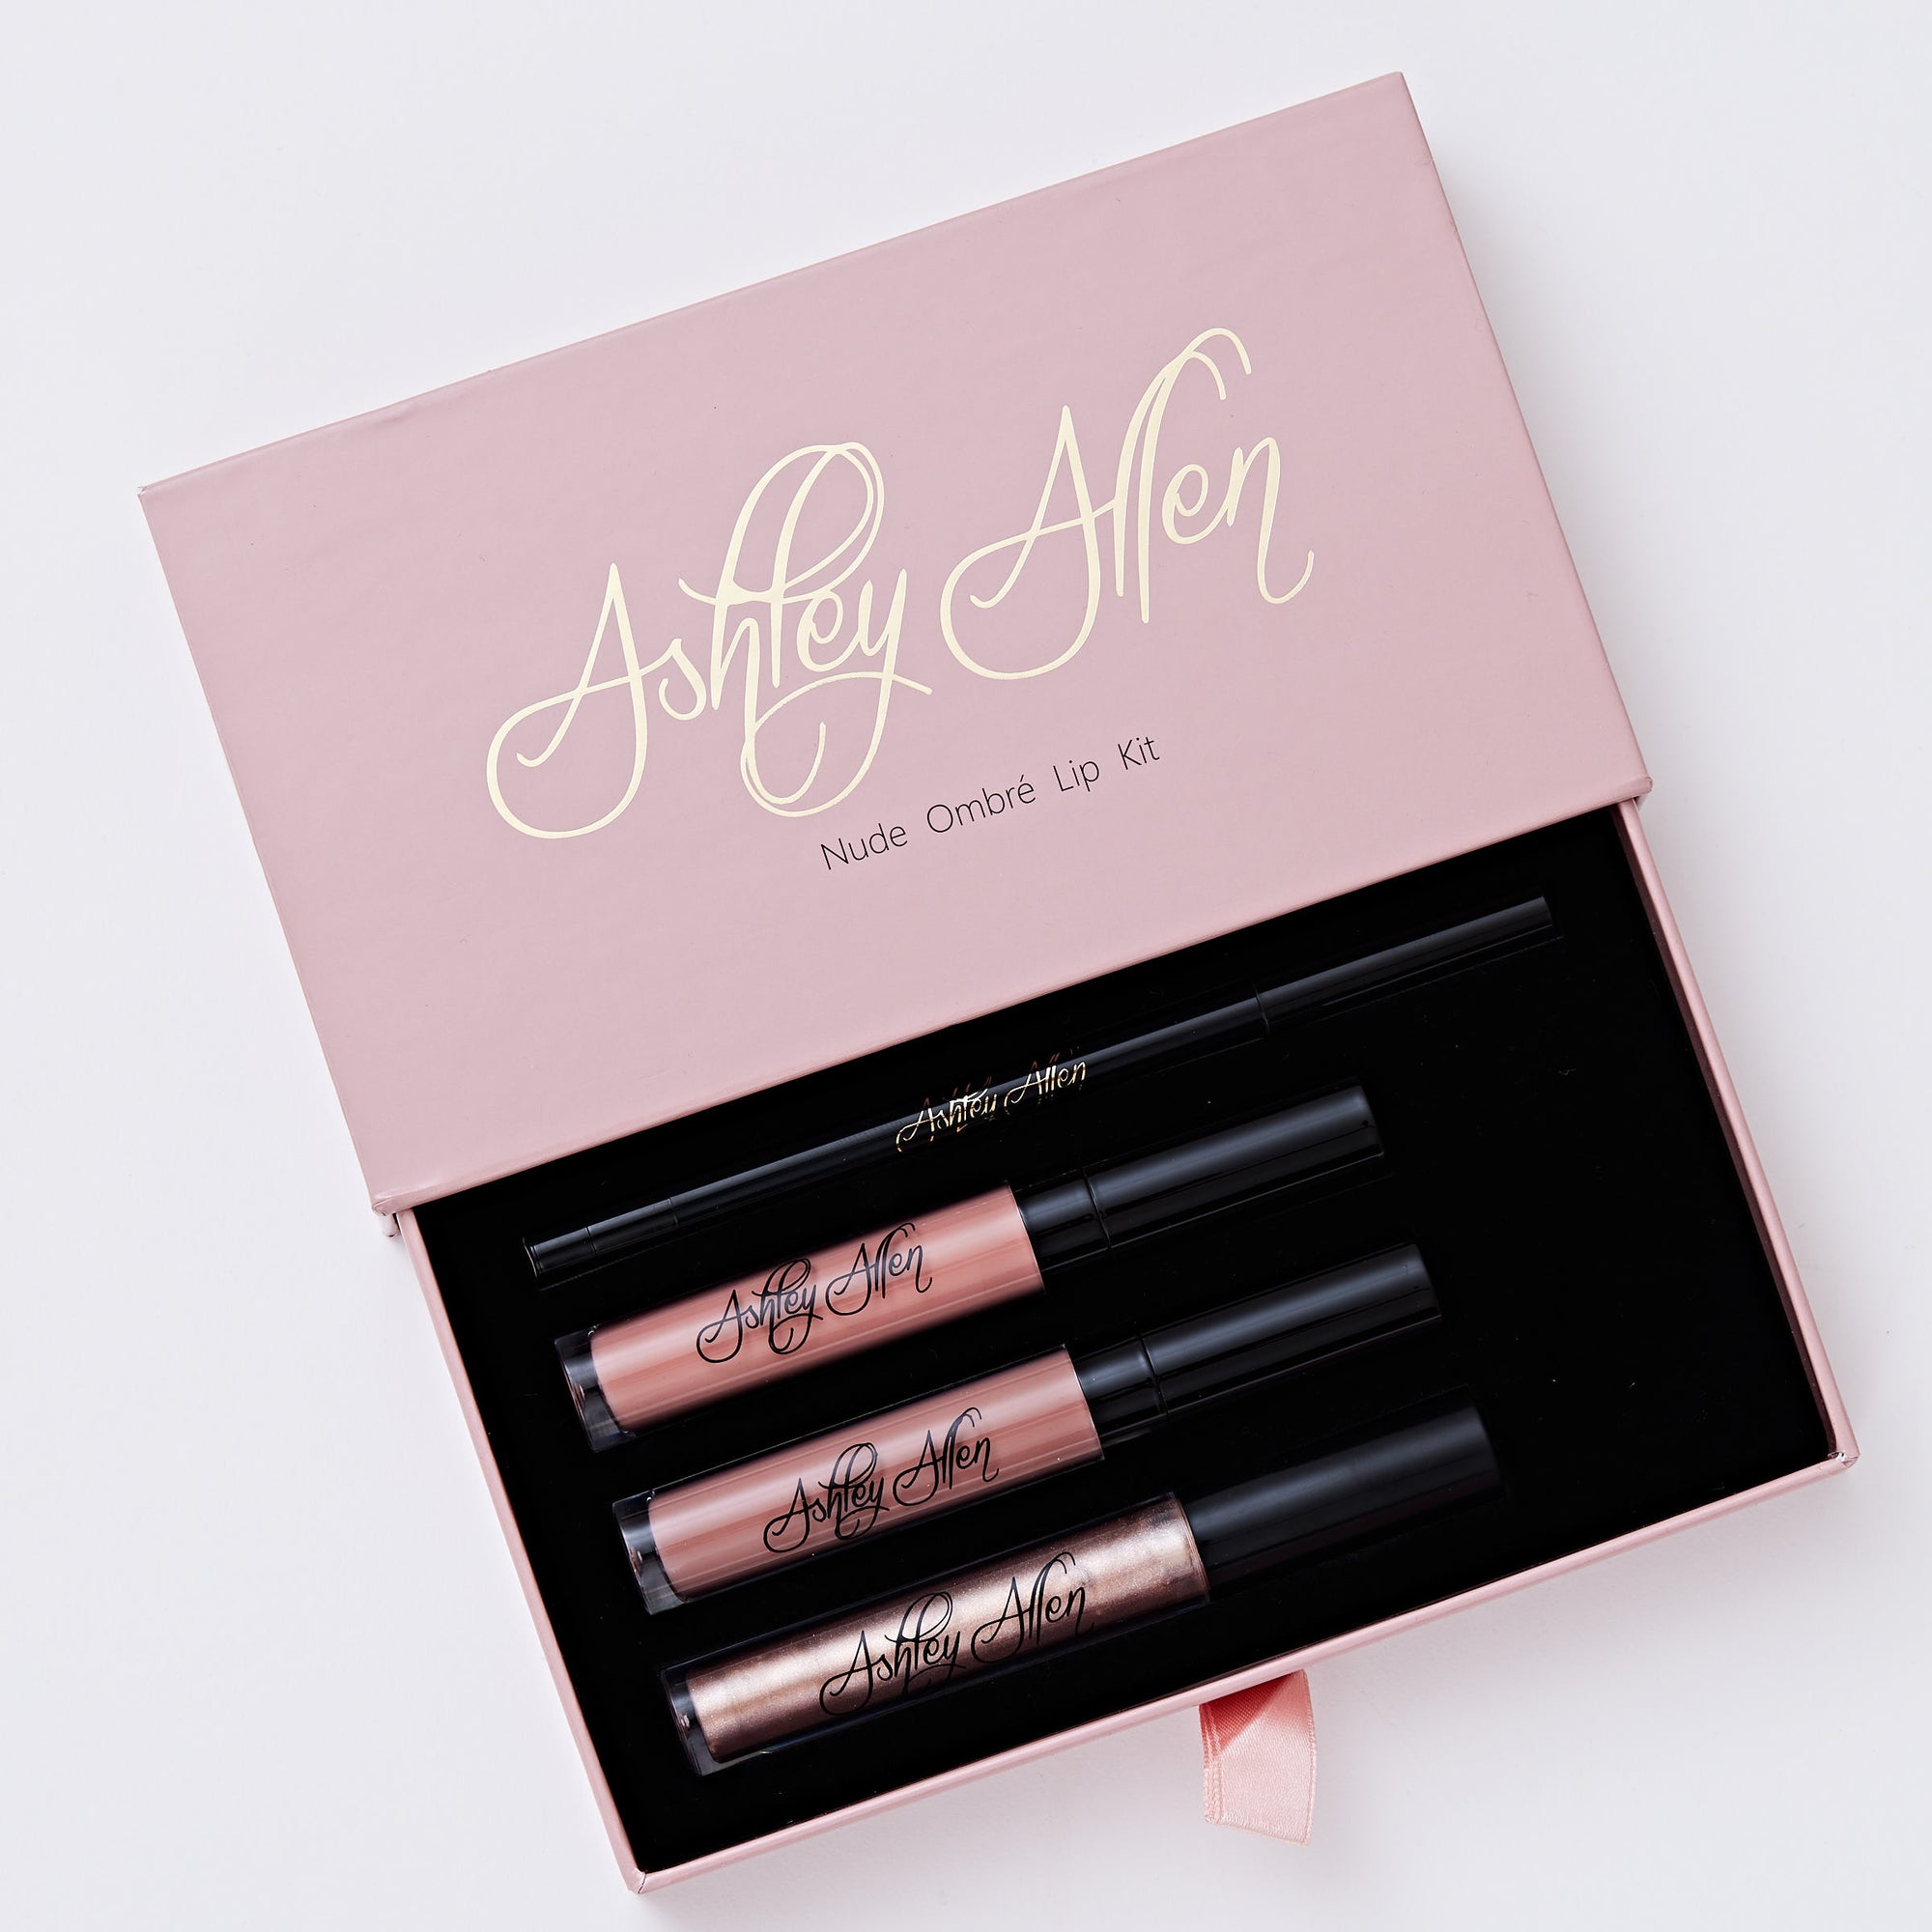 Lip Kit N2 (50% OFF) will be $40.00 Activated at checkout